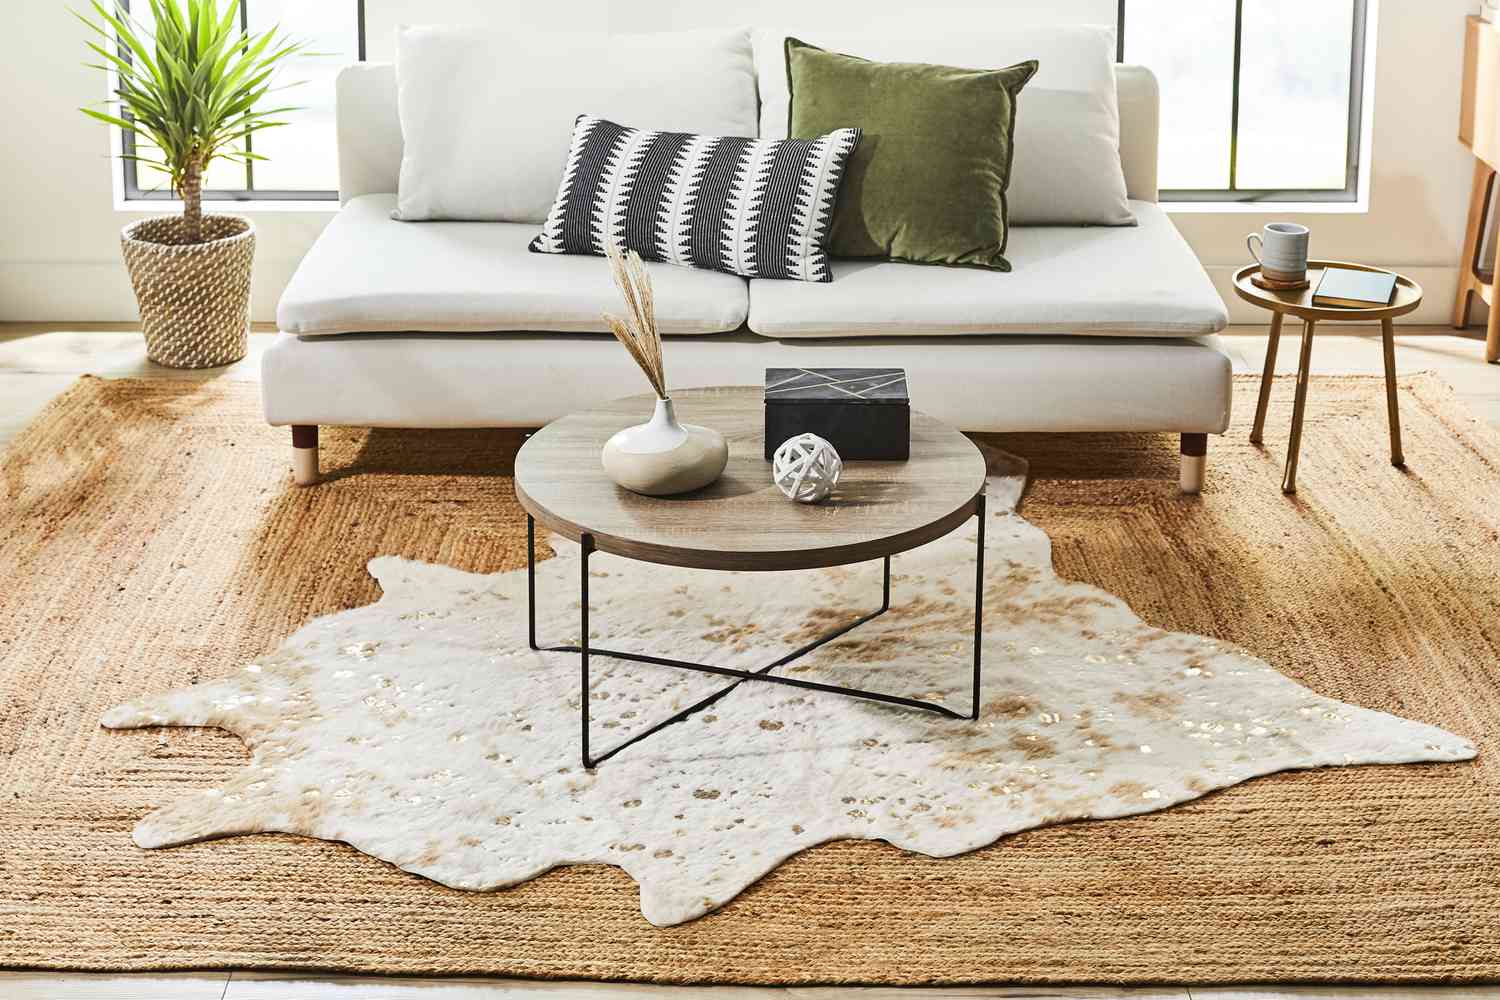 How To Layer A Jute Rug